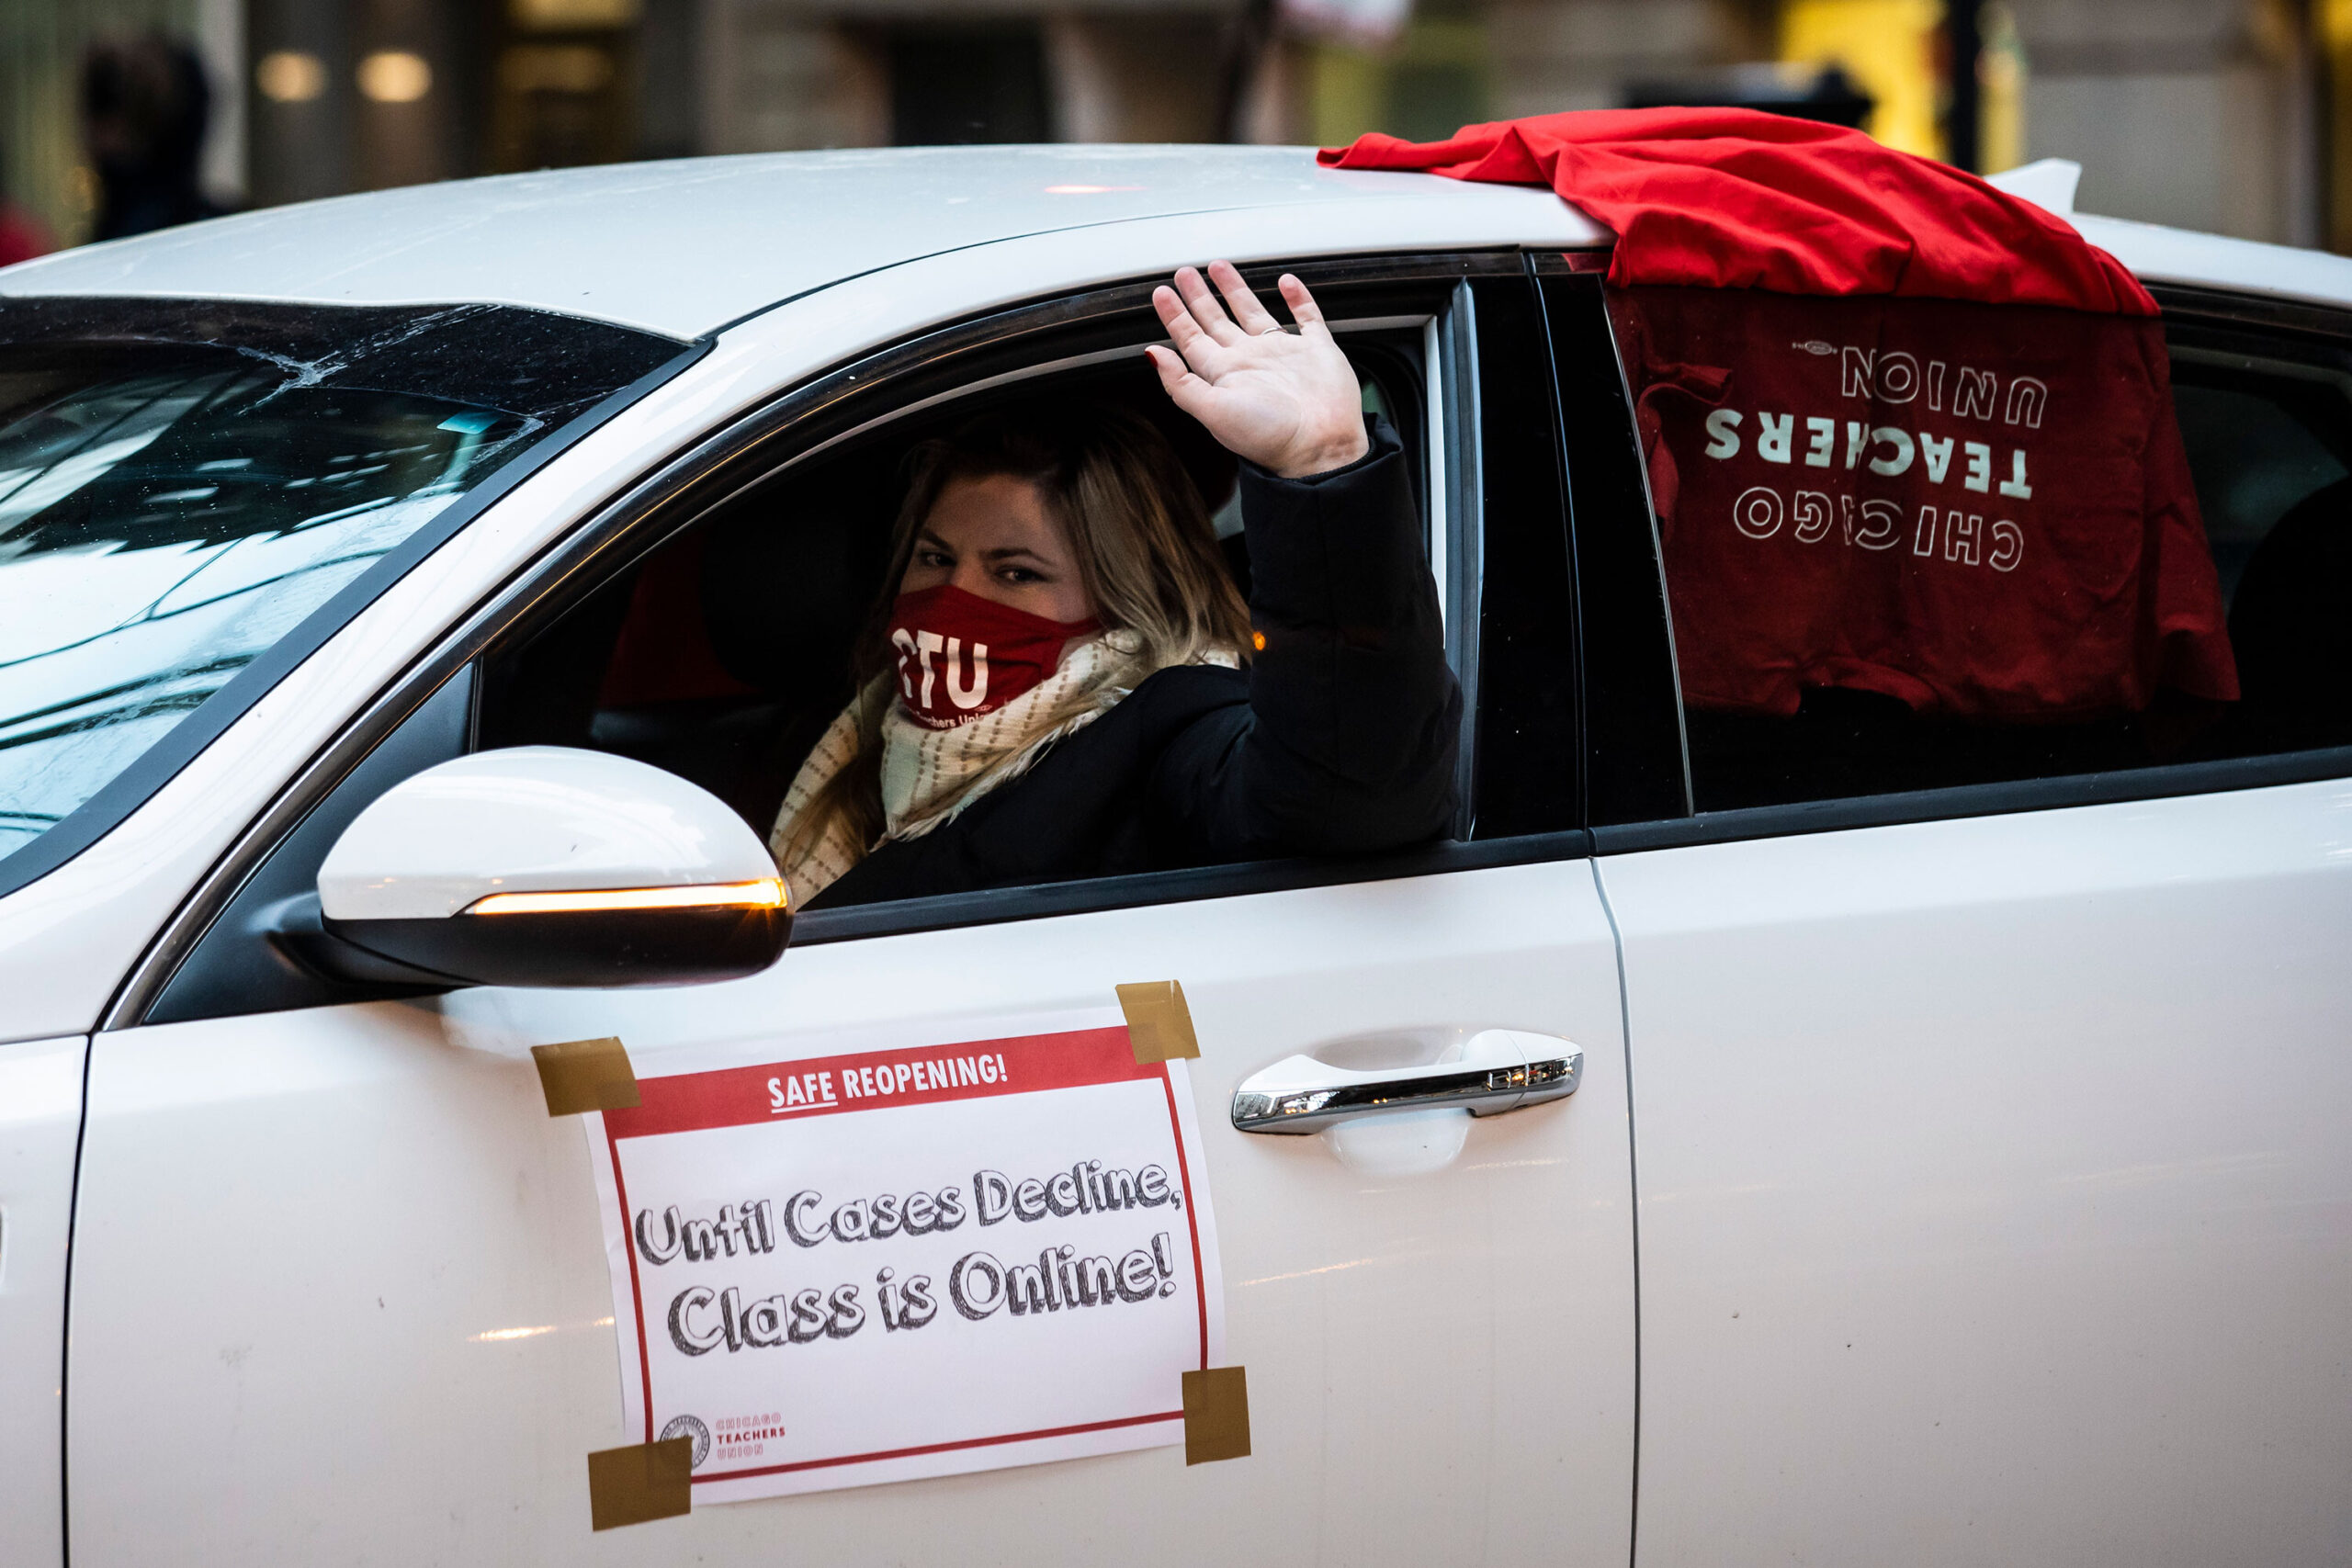 <i>Ashlee Rezin /Chicago Sun-Times via AP</i><br/>Members of the Chicago Teachers Union and supporters stage a car caravan protest outside City Hall